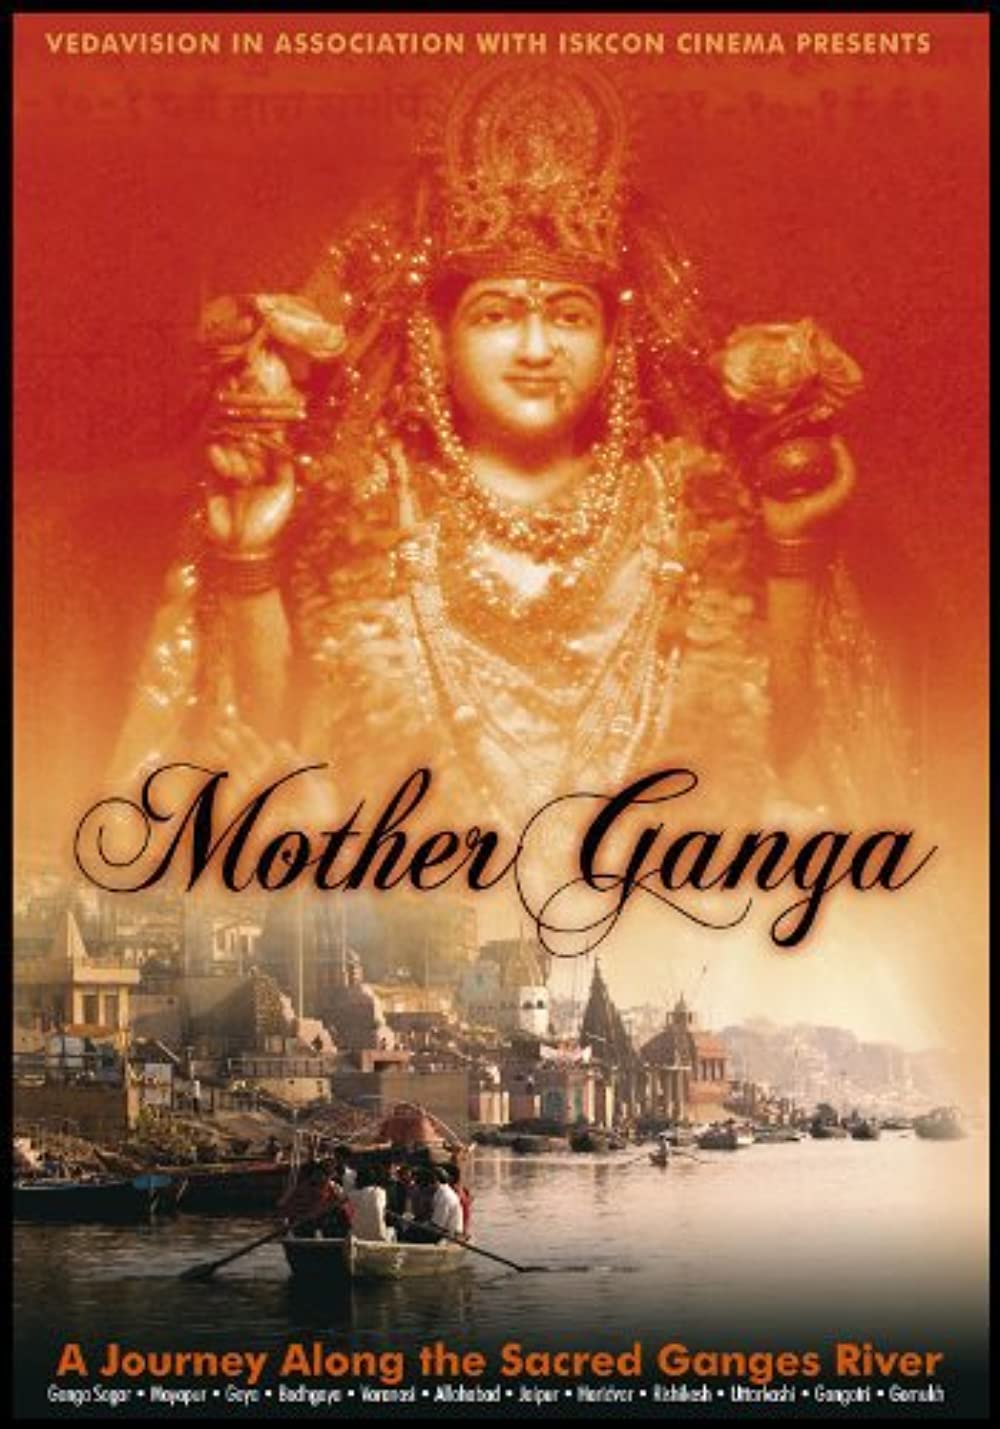 Download Mother Ganga: A Journey Along the Sacred Ganges River Movie | Mother Ganga: A Journey Along The Sacred Ganges River Hd, Dvd, Divx